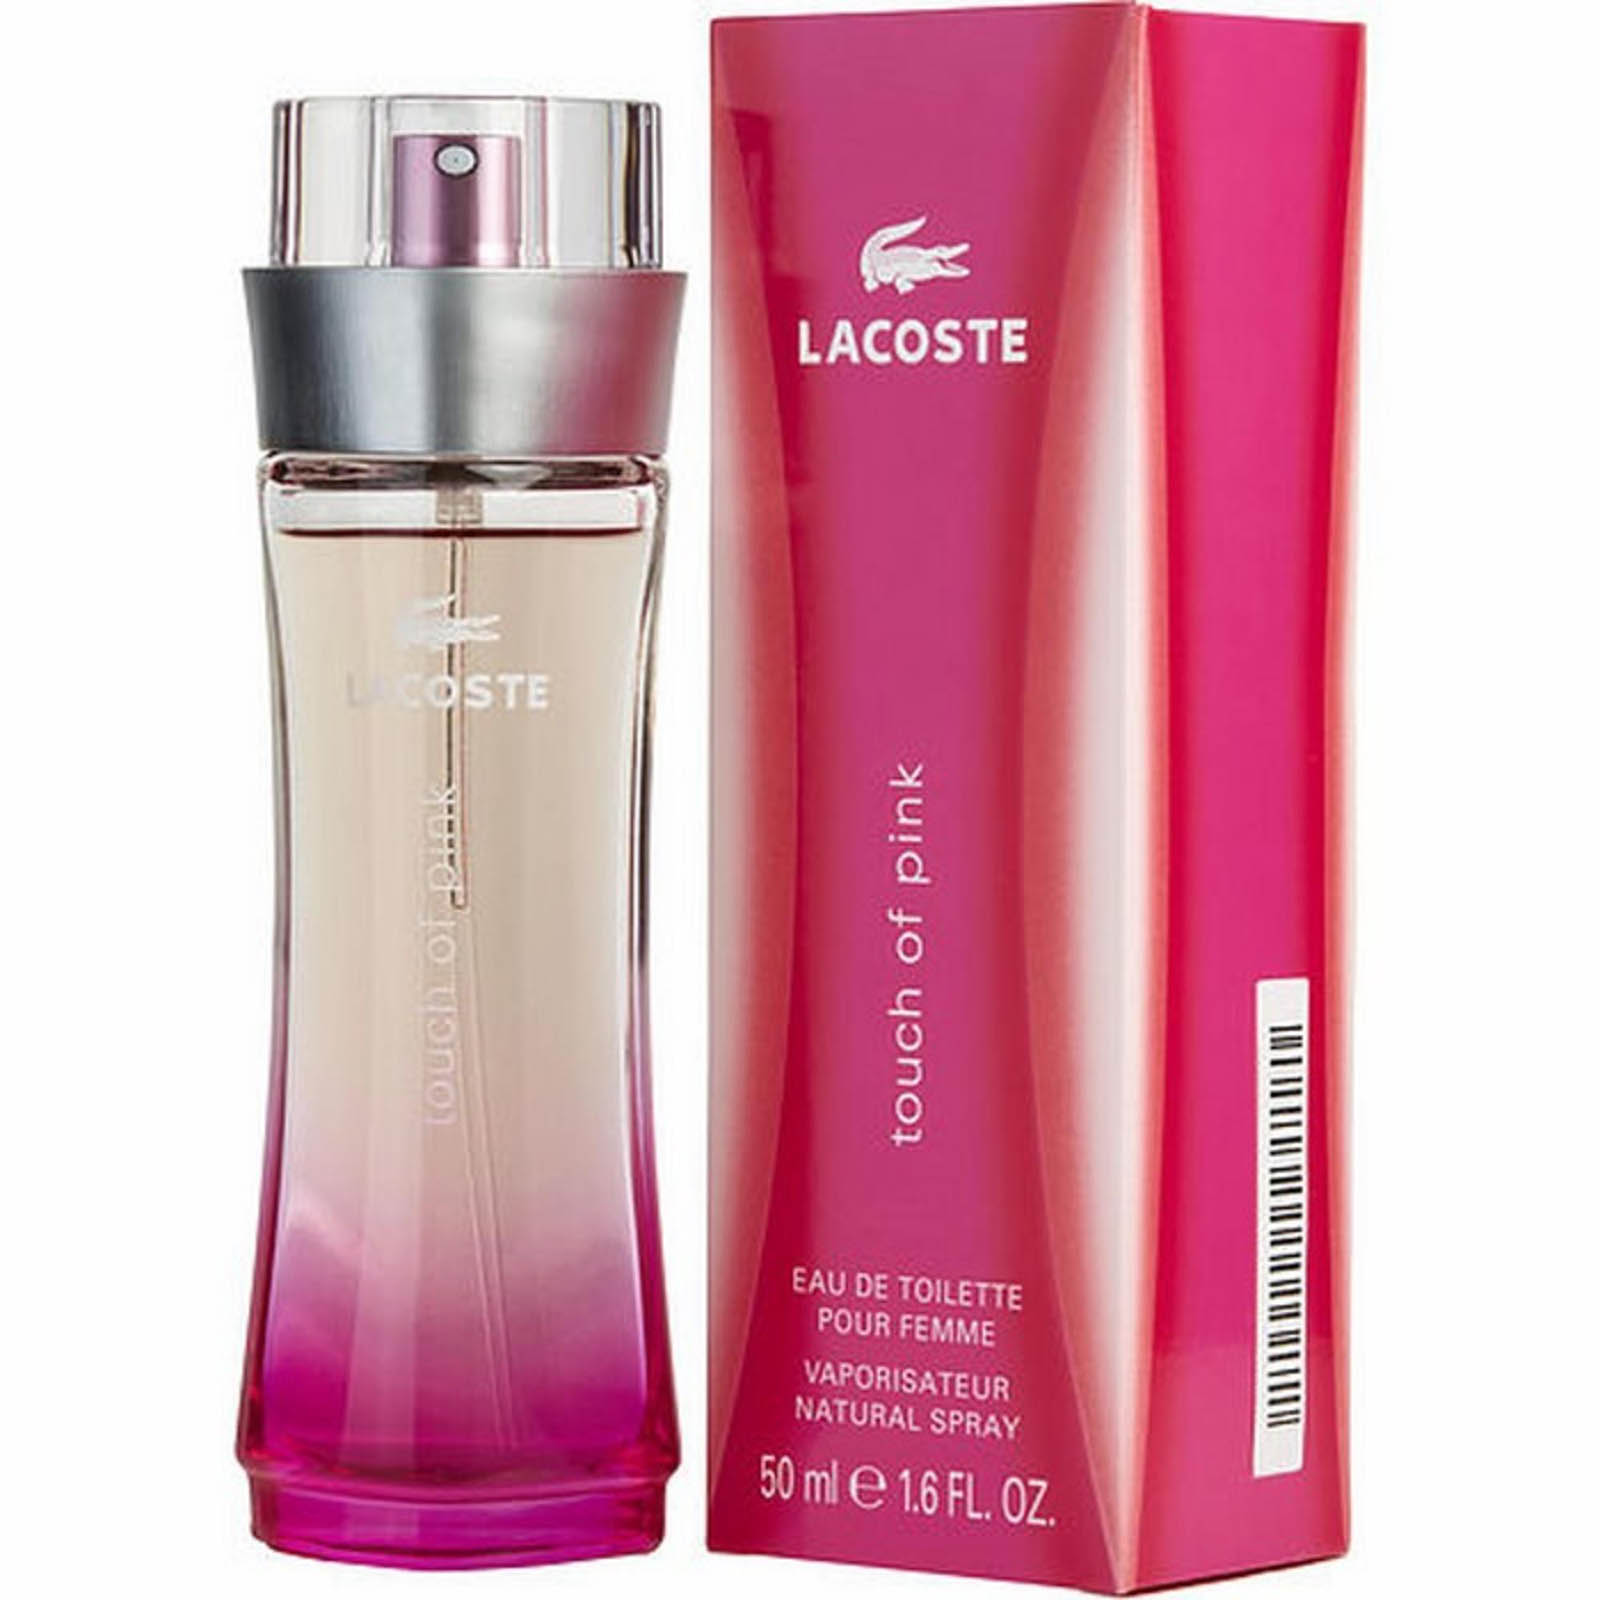 Легкая туалетная вода. Lacoste Touch of Pink w 90ml Premium. Lacoste Touch of Pink 90ml. Lacoste Touch of Pink. Lacoste Touch of Pink (l) EDT 90ml.